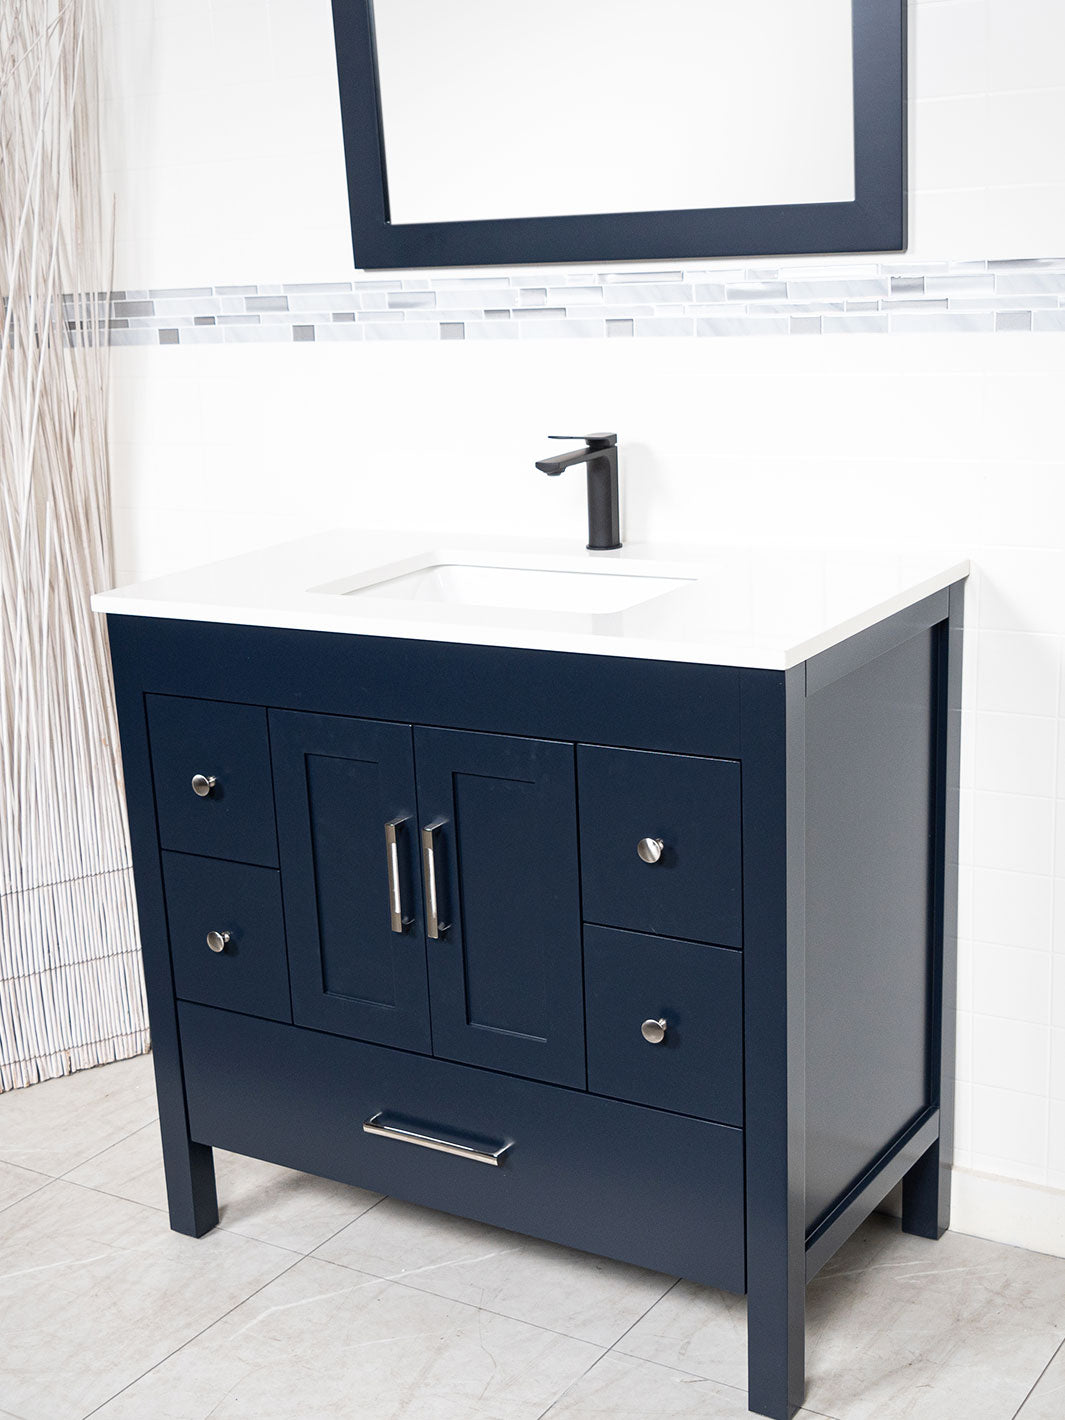 Blue bathroom vanity with white counter, black faucet